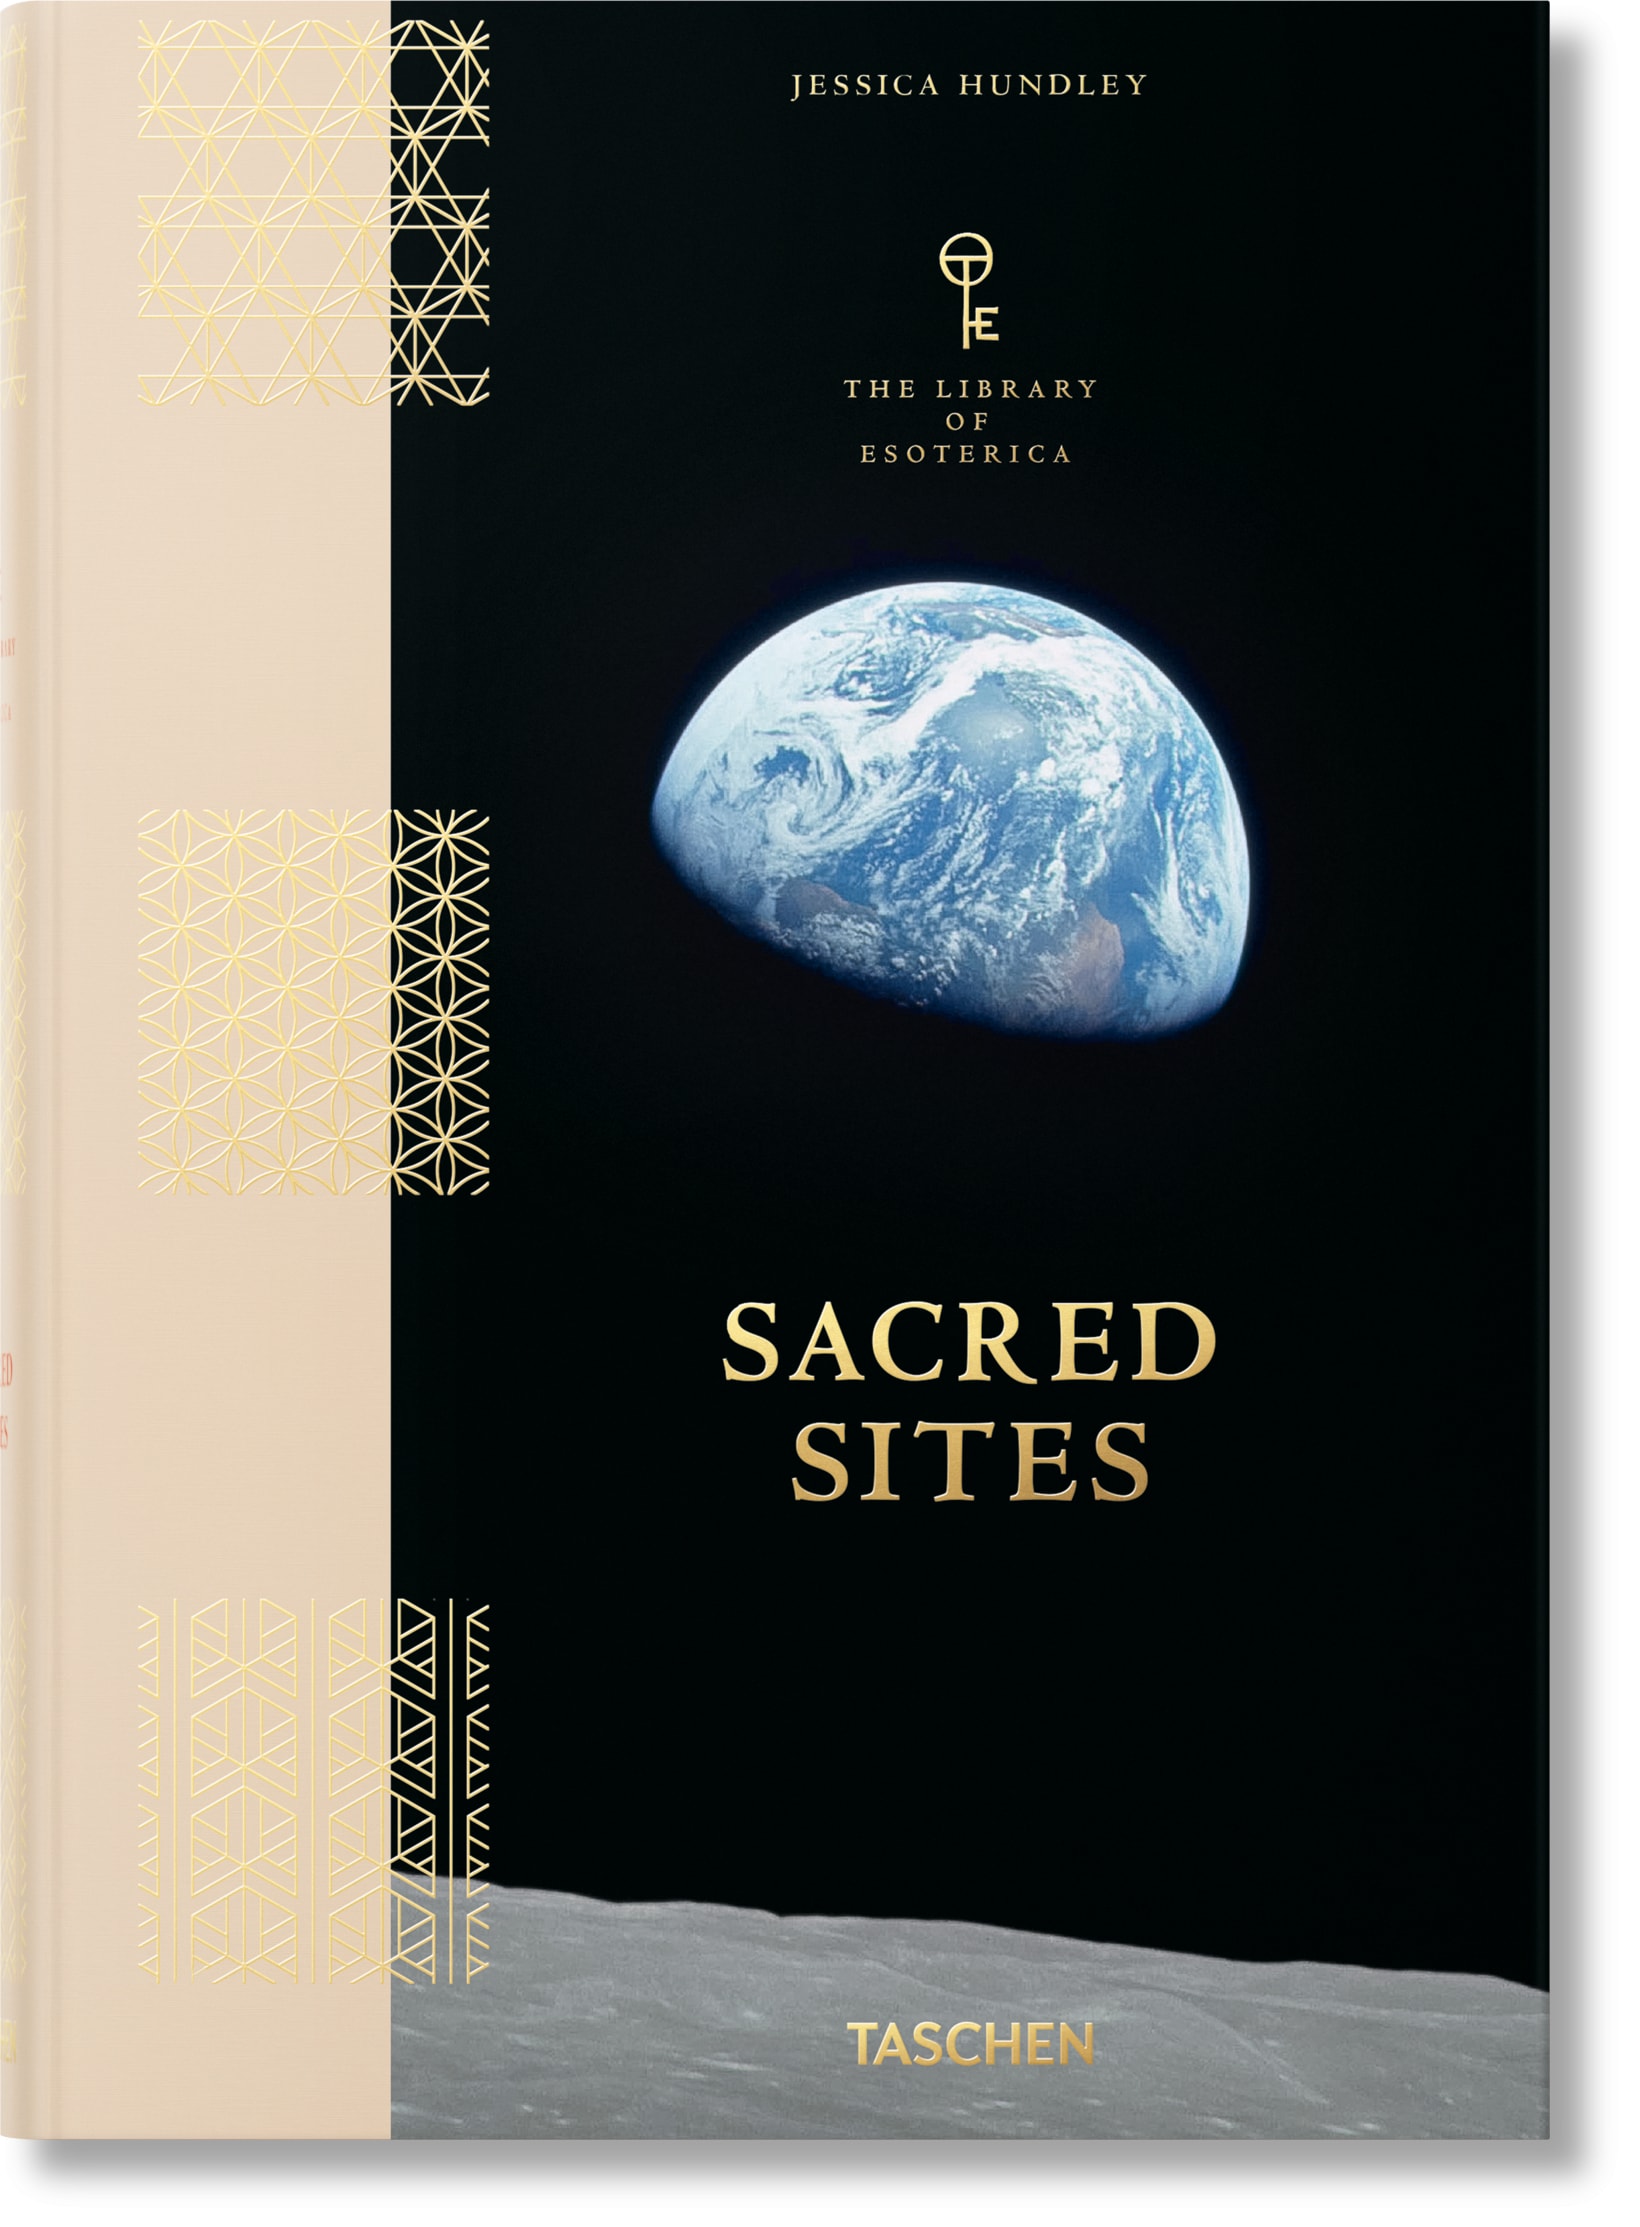 From Machu Picchu to the Louvre – a new book travels to sacred sites of art and ancient history